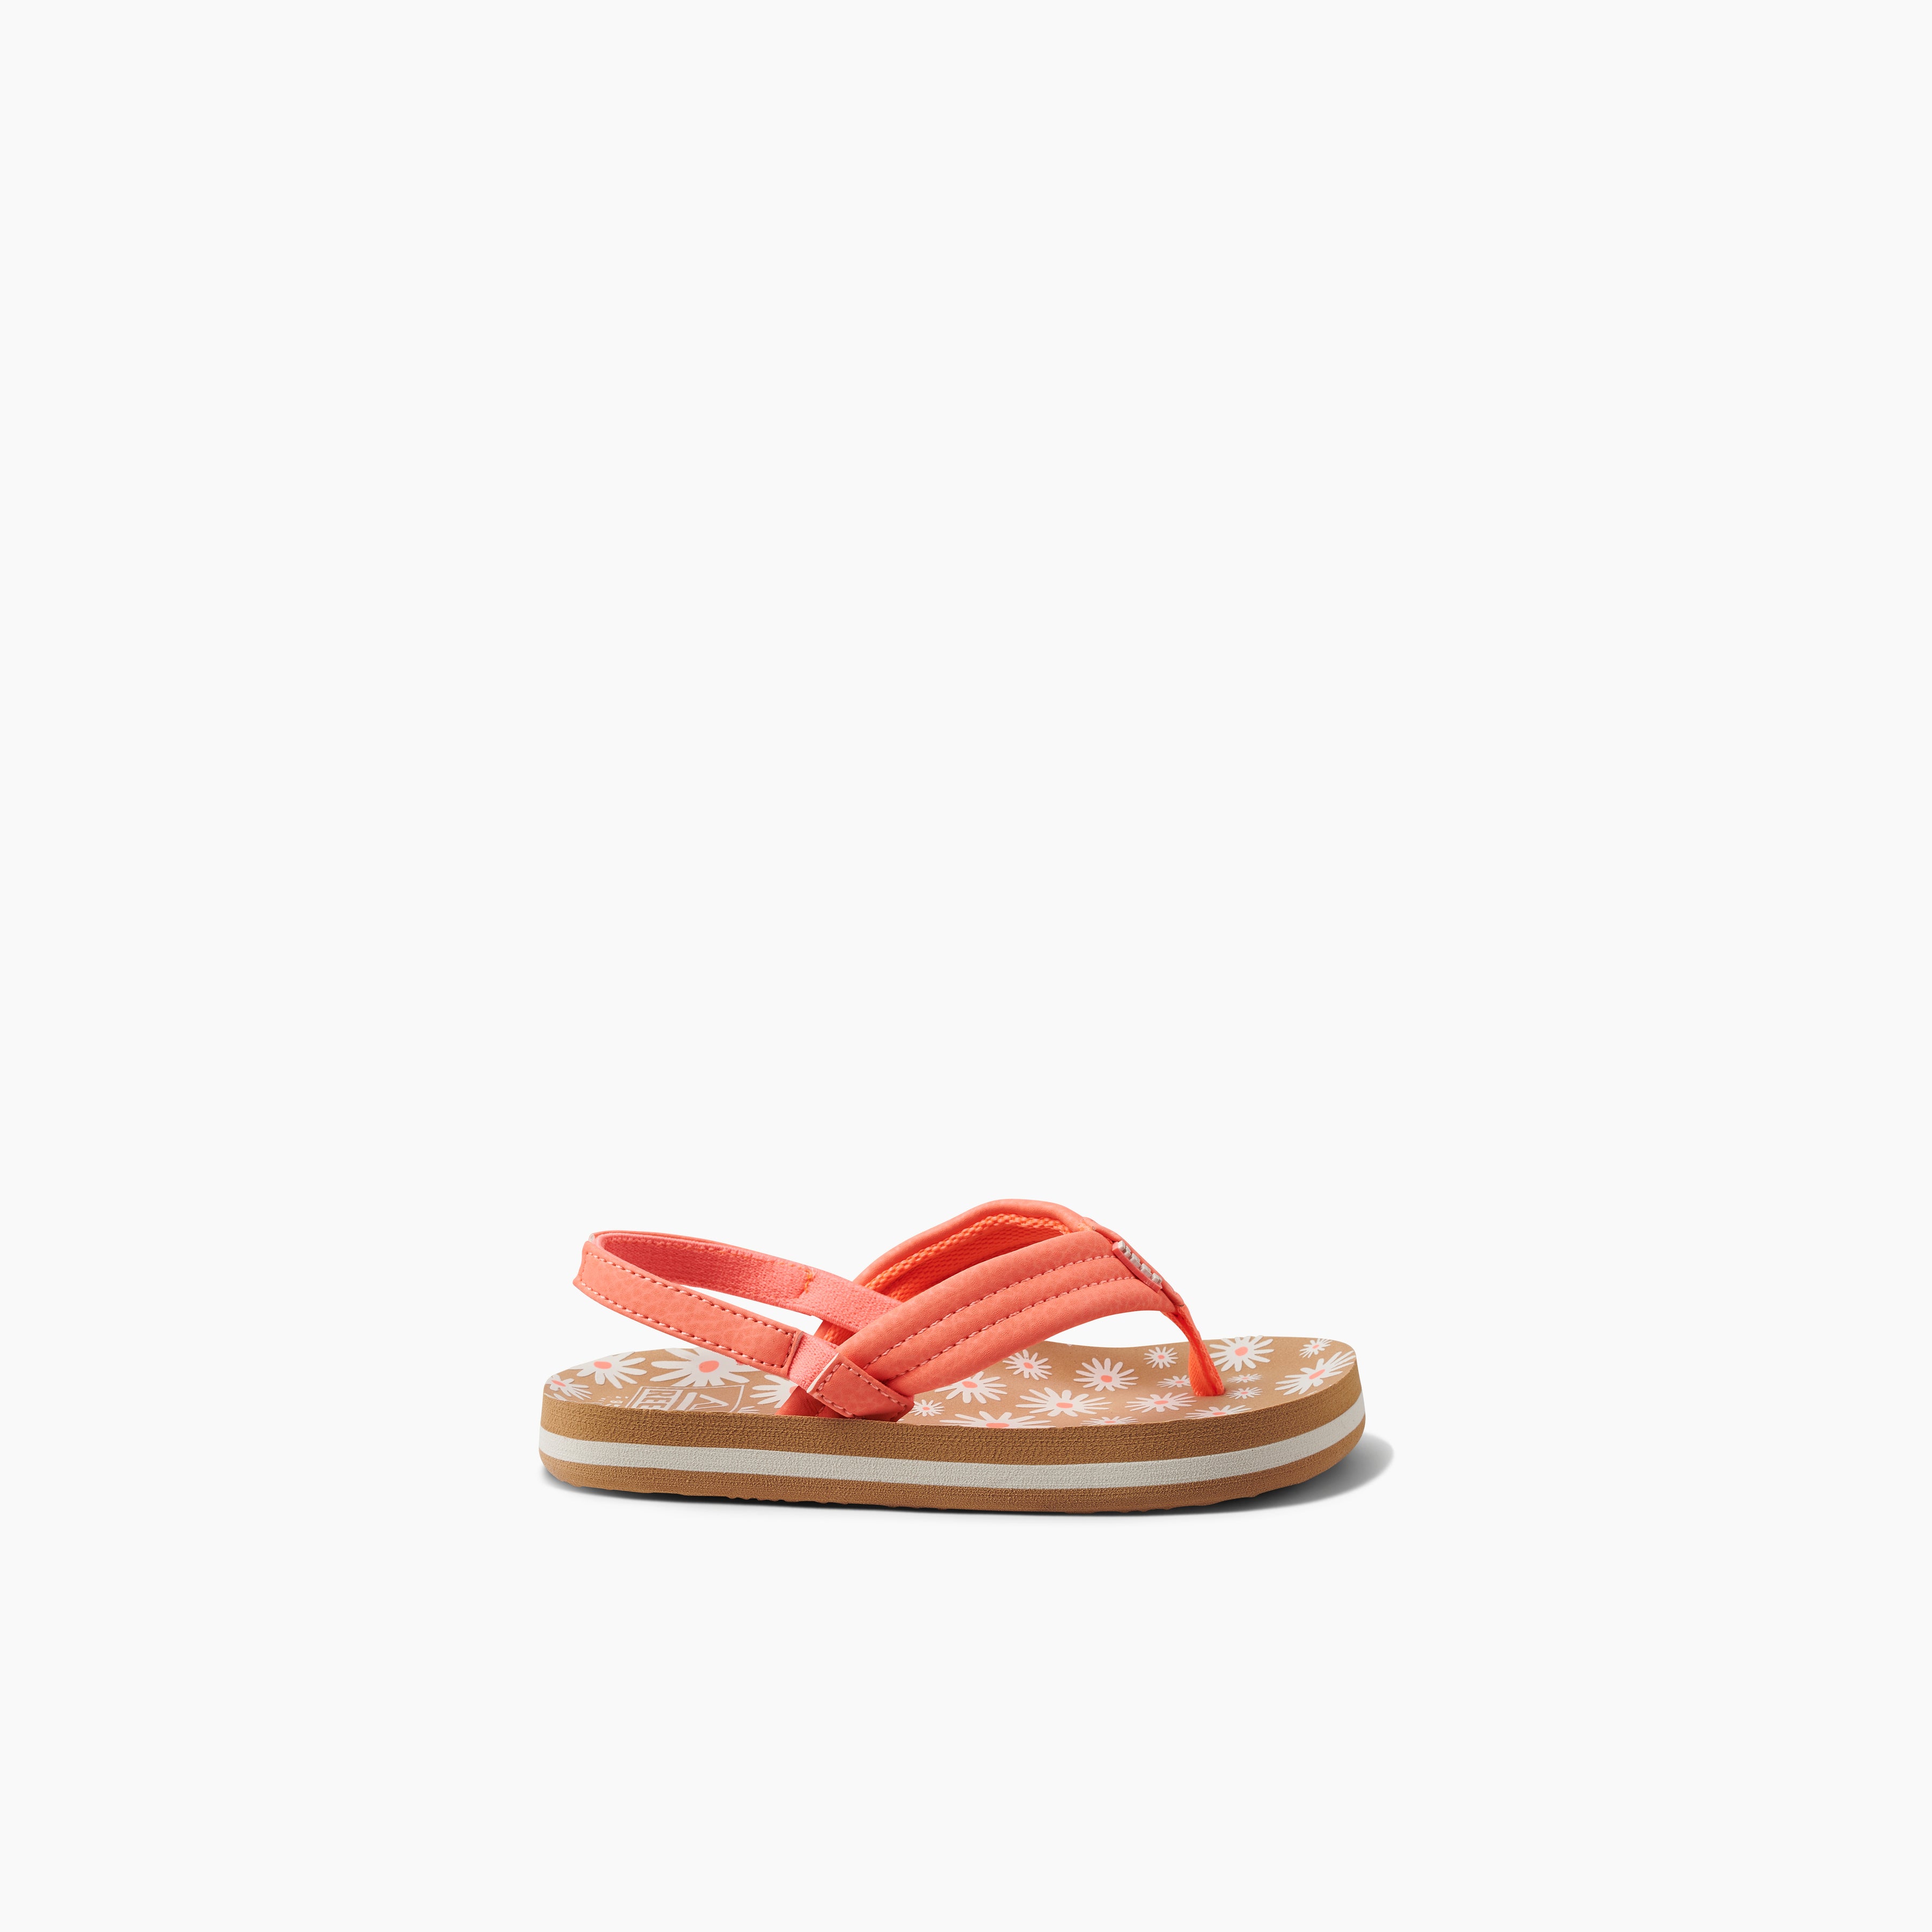 Toddler Girl's Ahi Sandals in Daisy side view